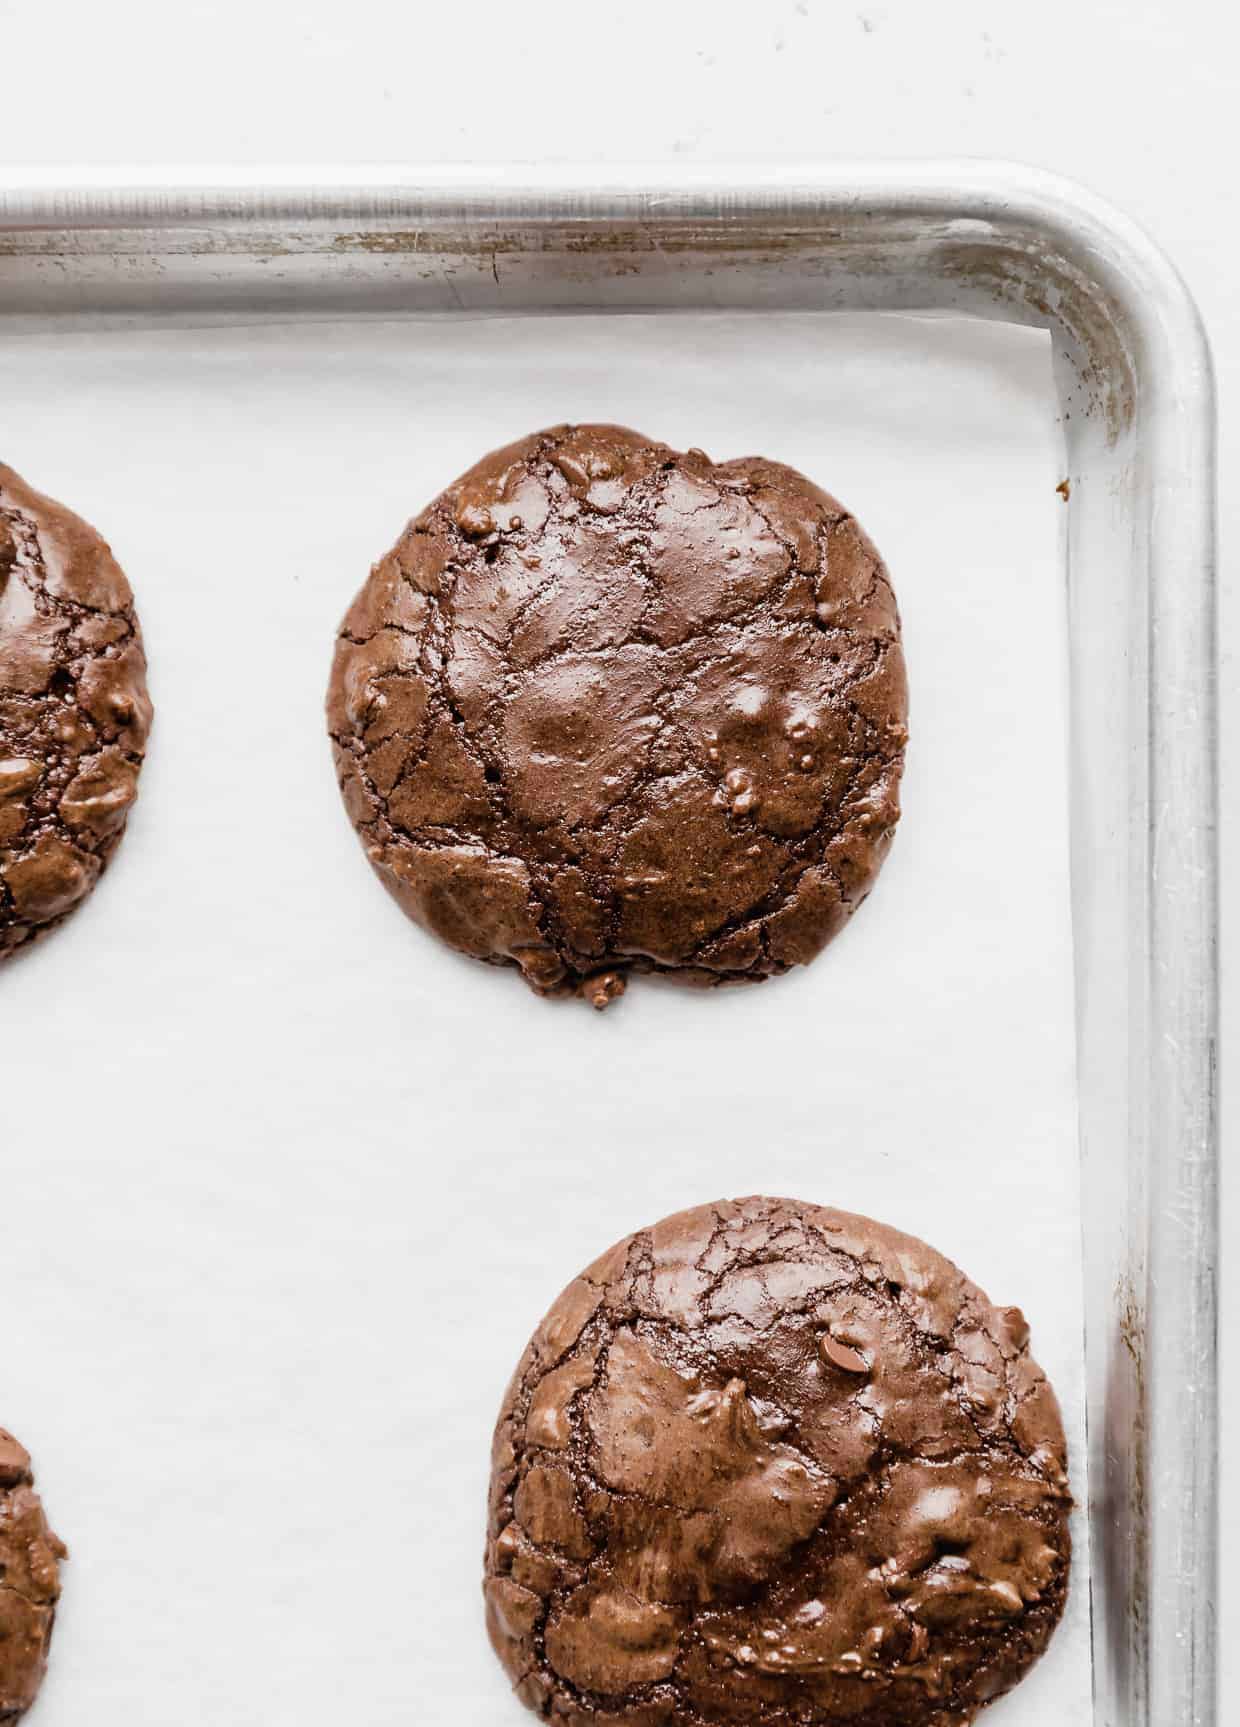 A freshly baked Brownie mix cookie with a crackly top, on a parchment lined baking sheet against a white background.